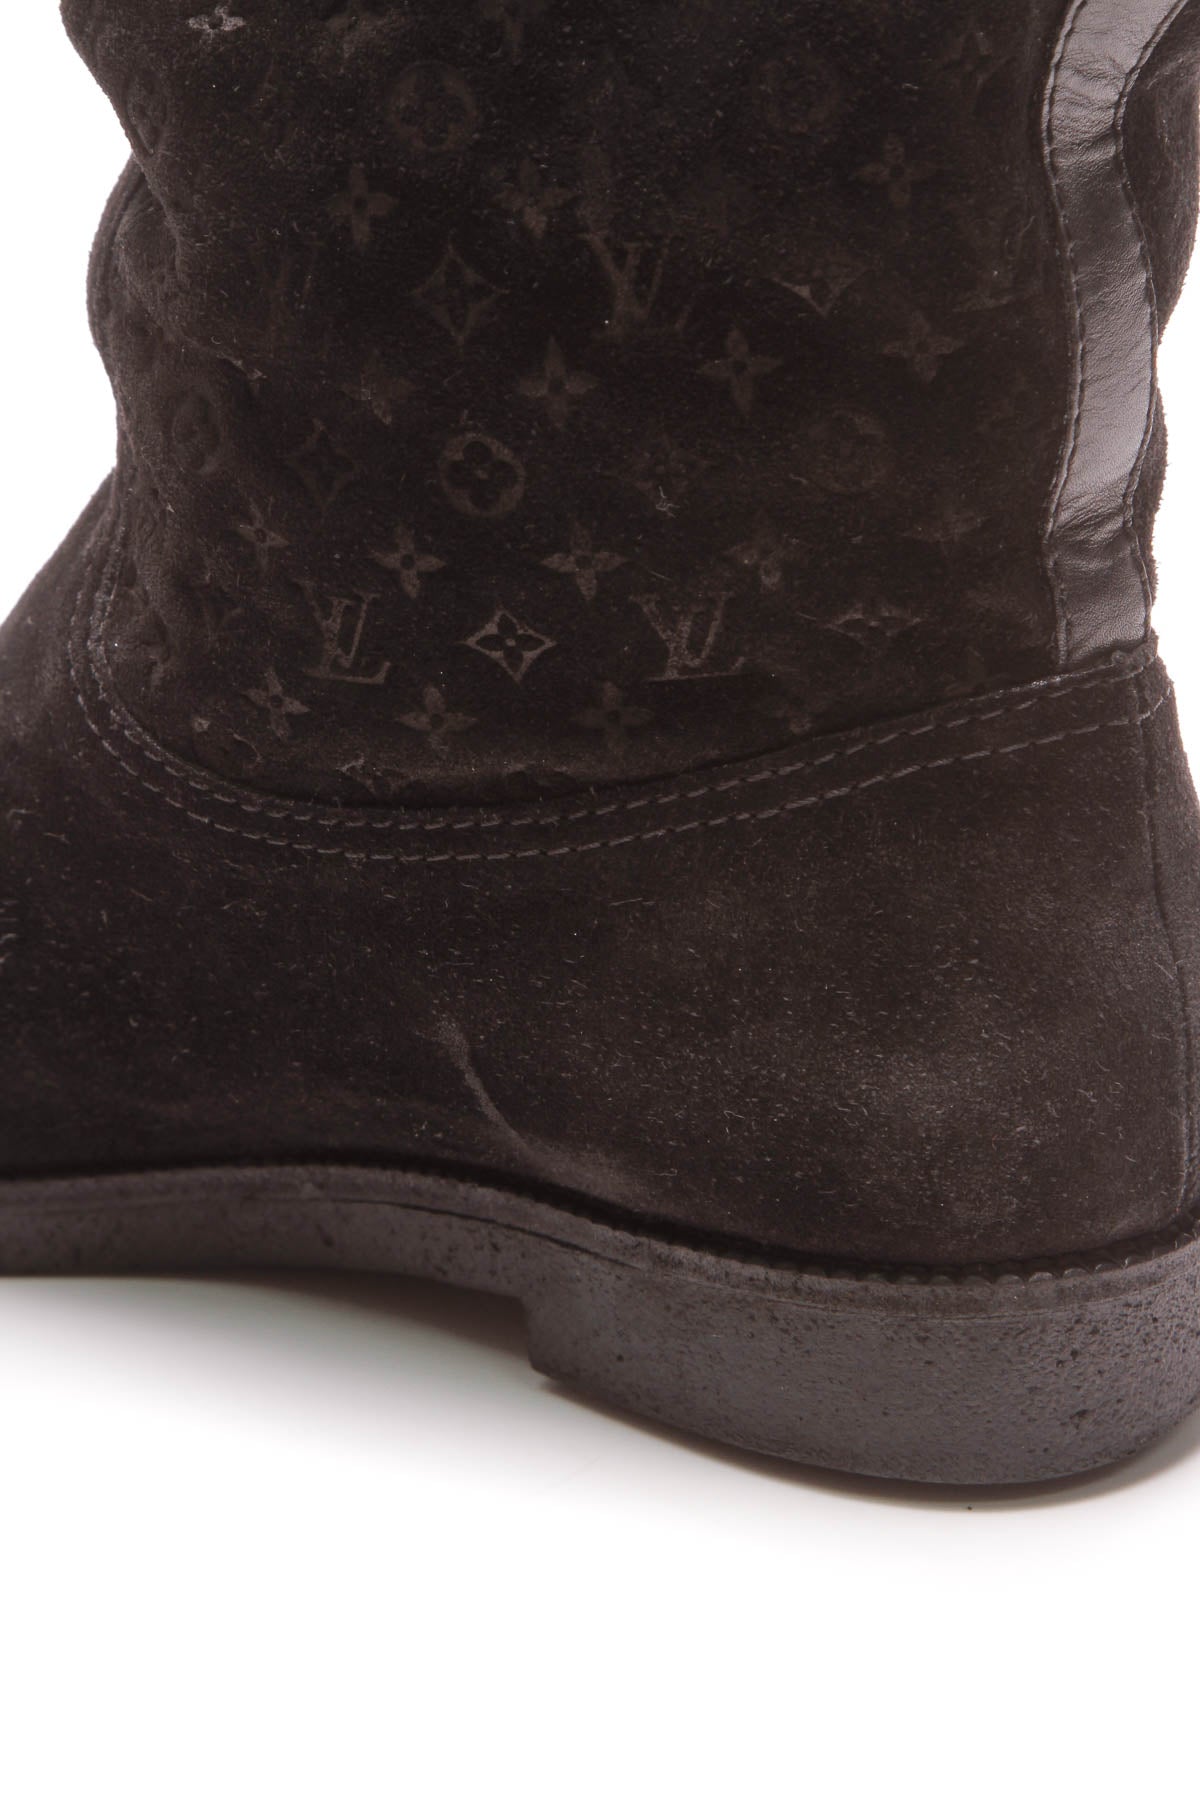 Louis Vuitton Monogram Suede & Shearling Calf Boots - Black Size 41 – Couture USA